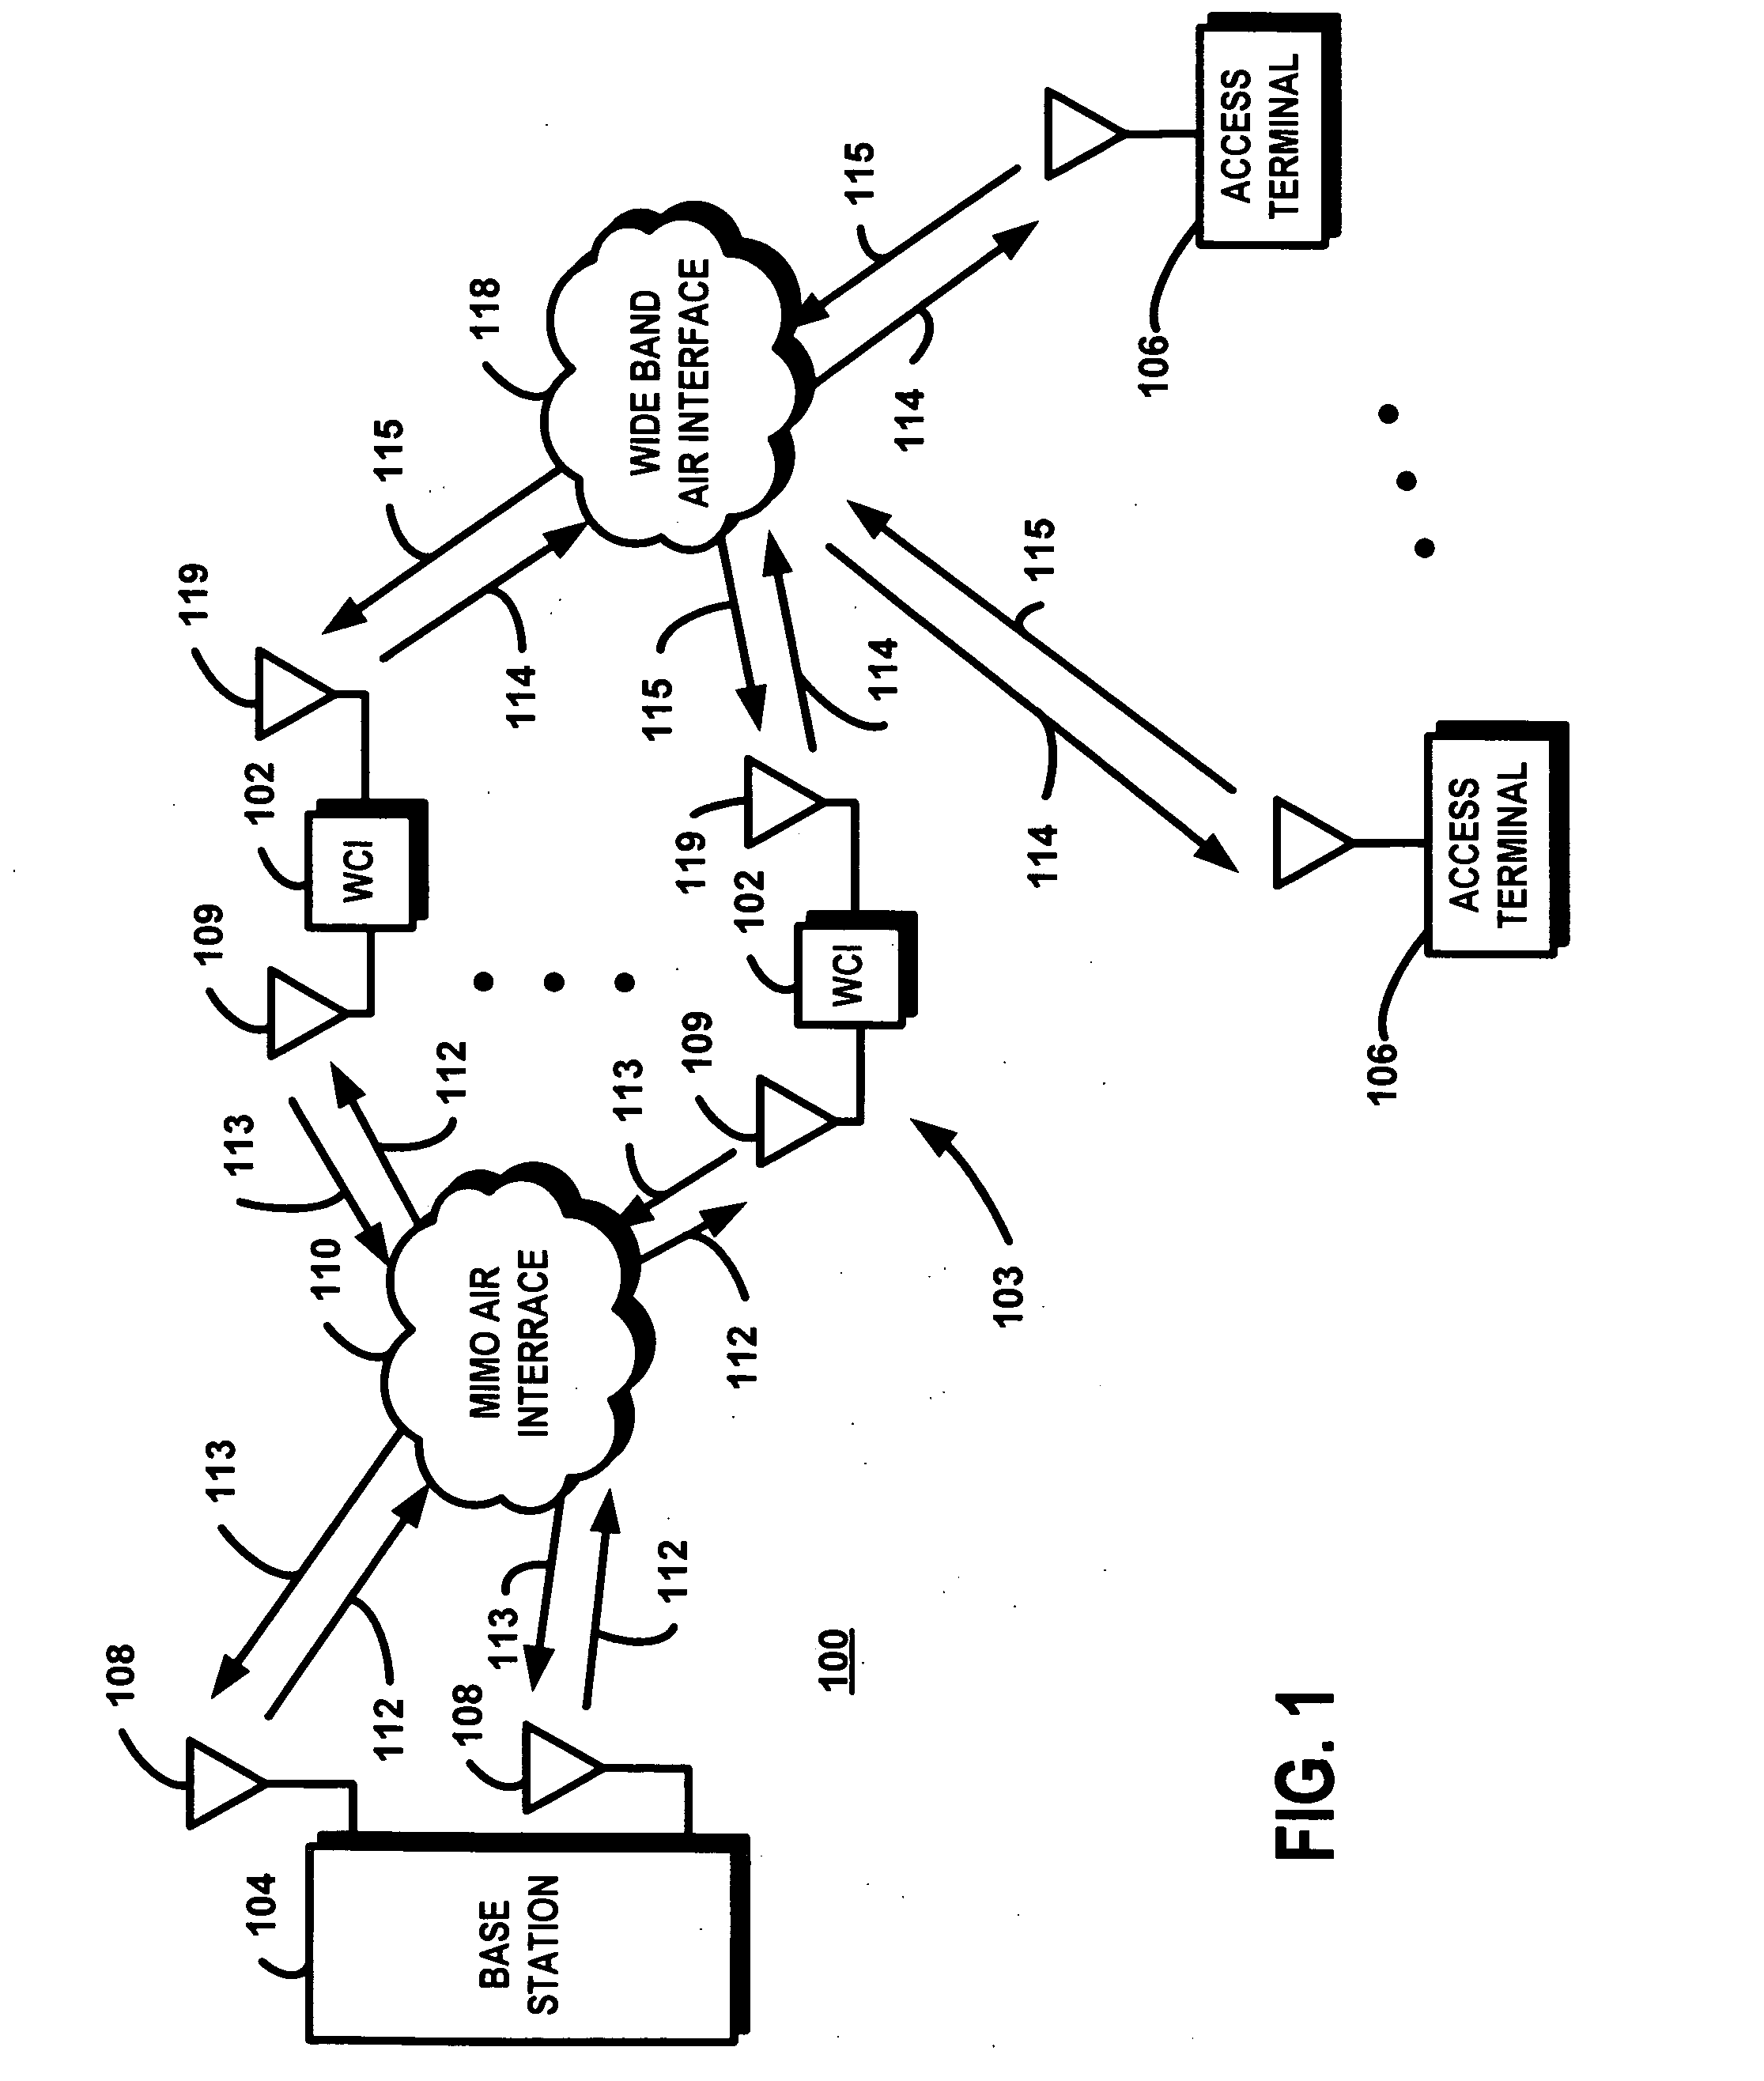 Apparatus, system and method for providing a multiple input/multiple output (MIMO) channel interface